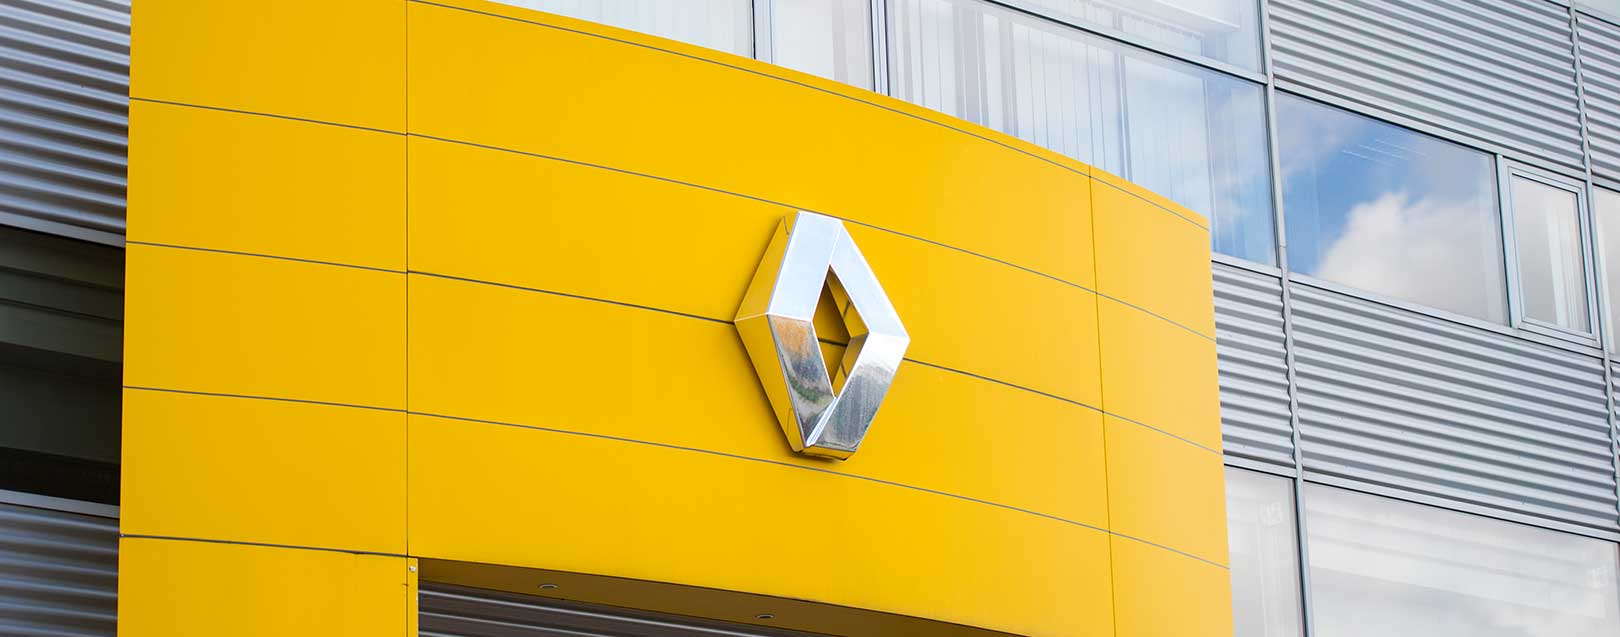 Renault expects sales growth of 8% in India this year